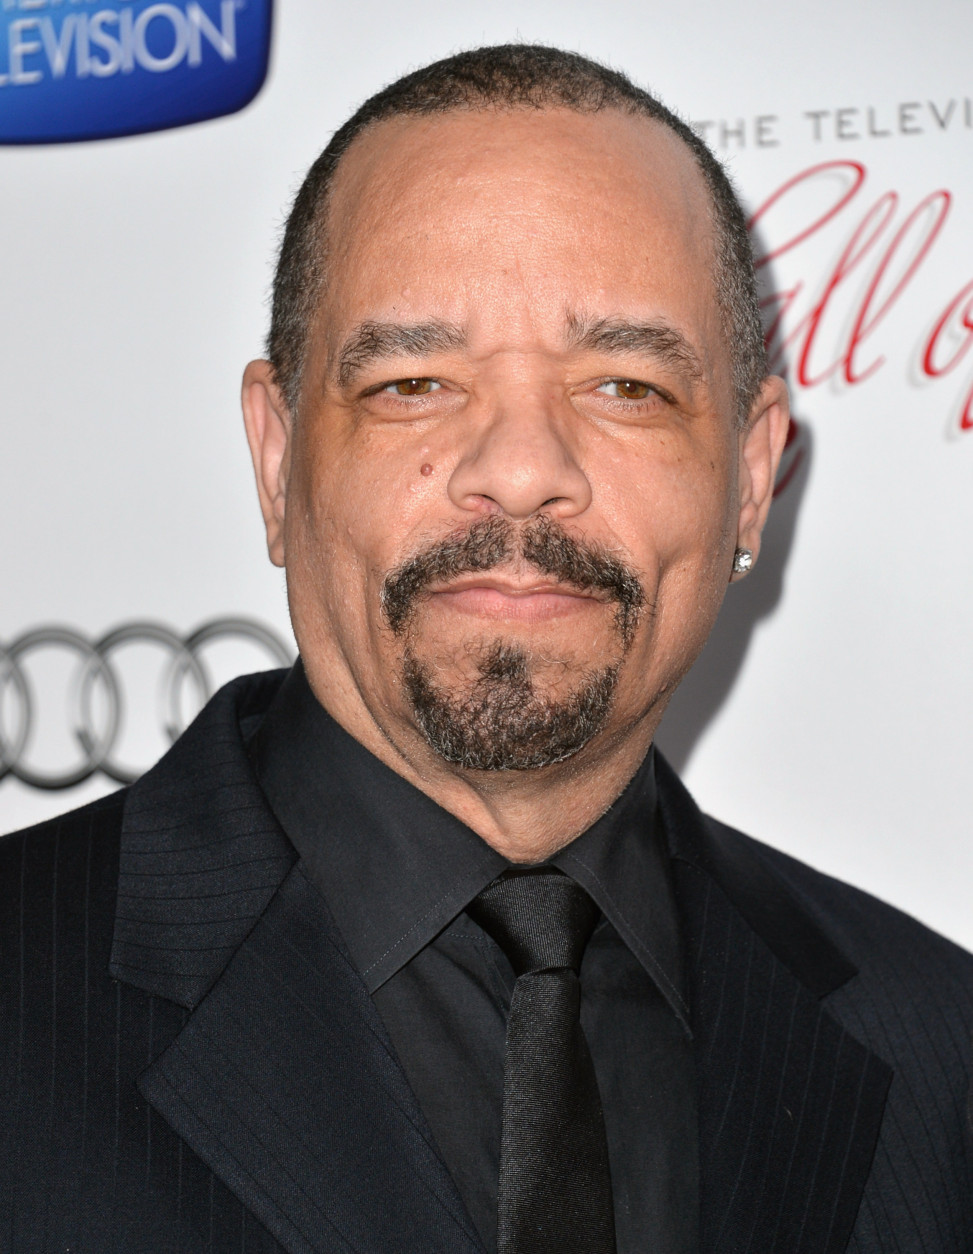 BEVERLY HILLS, CA - MARCH 11:  Actor Ice-T attends the Academy of Television Arts &amp; Sciences' 22nd Annual Hall of Fame Induction Gala at The Beverly Hilton Hotel on March 11, 2013 in Beverly Hills, California.  (Photo by Alberto E. Rodriguez/Getty Images)